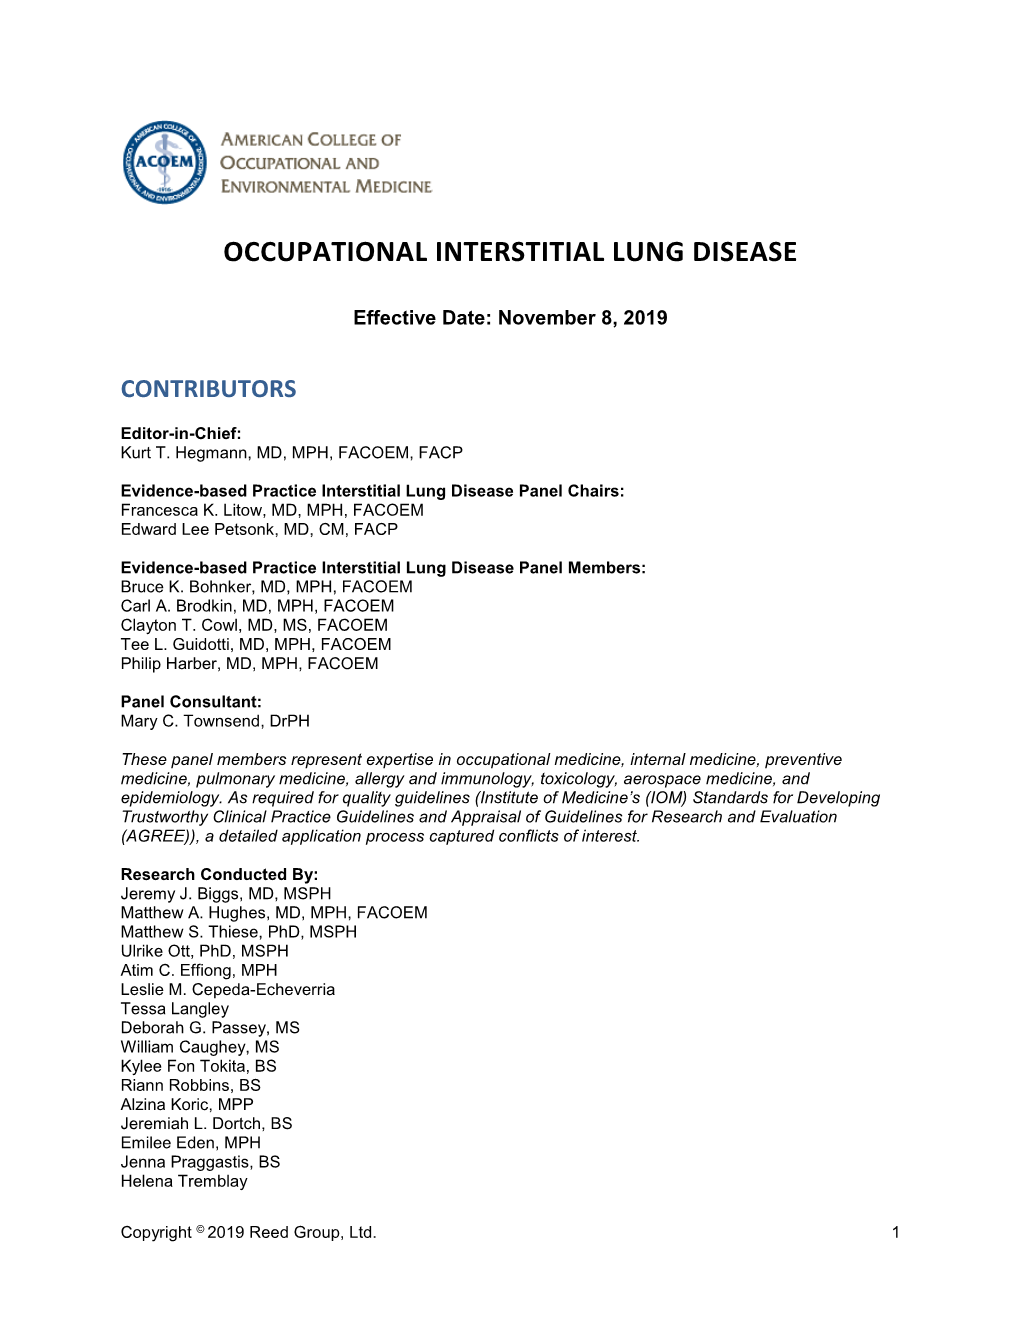 Occupational Interstitial Lung Disease Guideline